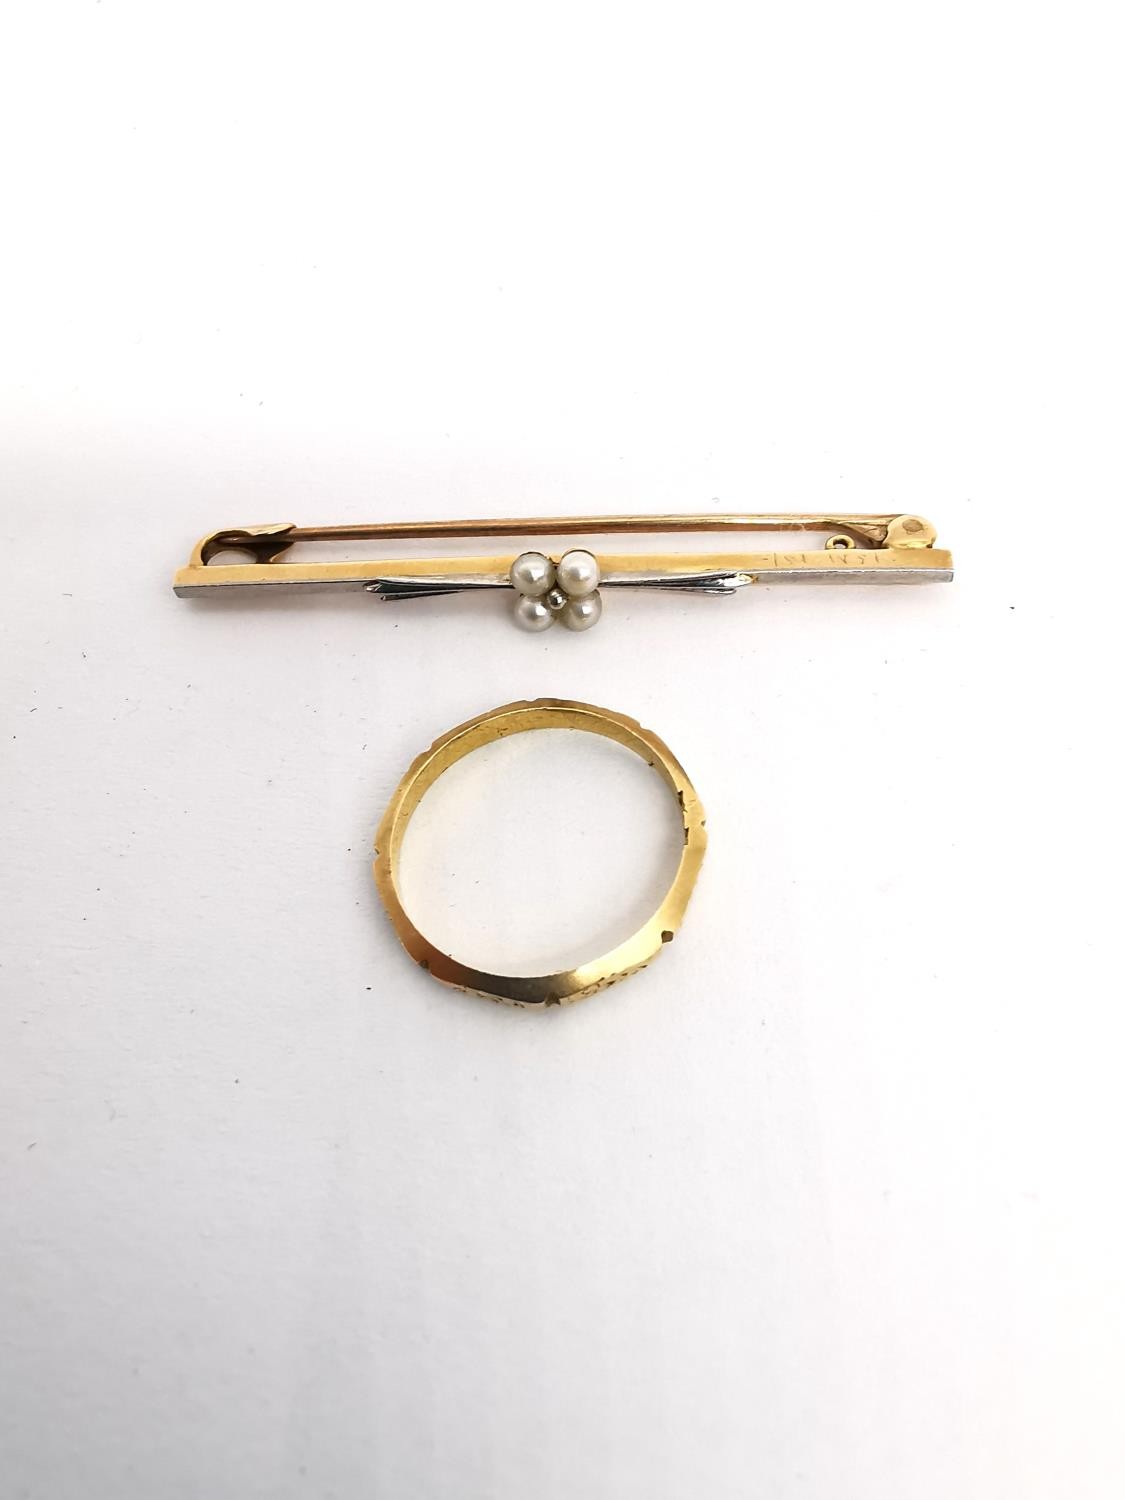 A 15ct rose and white gold and pearl floral bar brooch along with a Victorian 18ct sectioned and